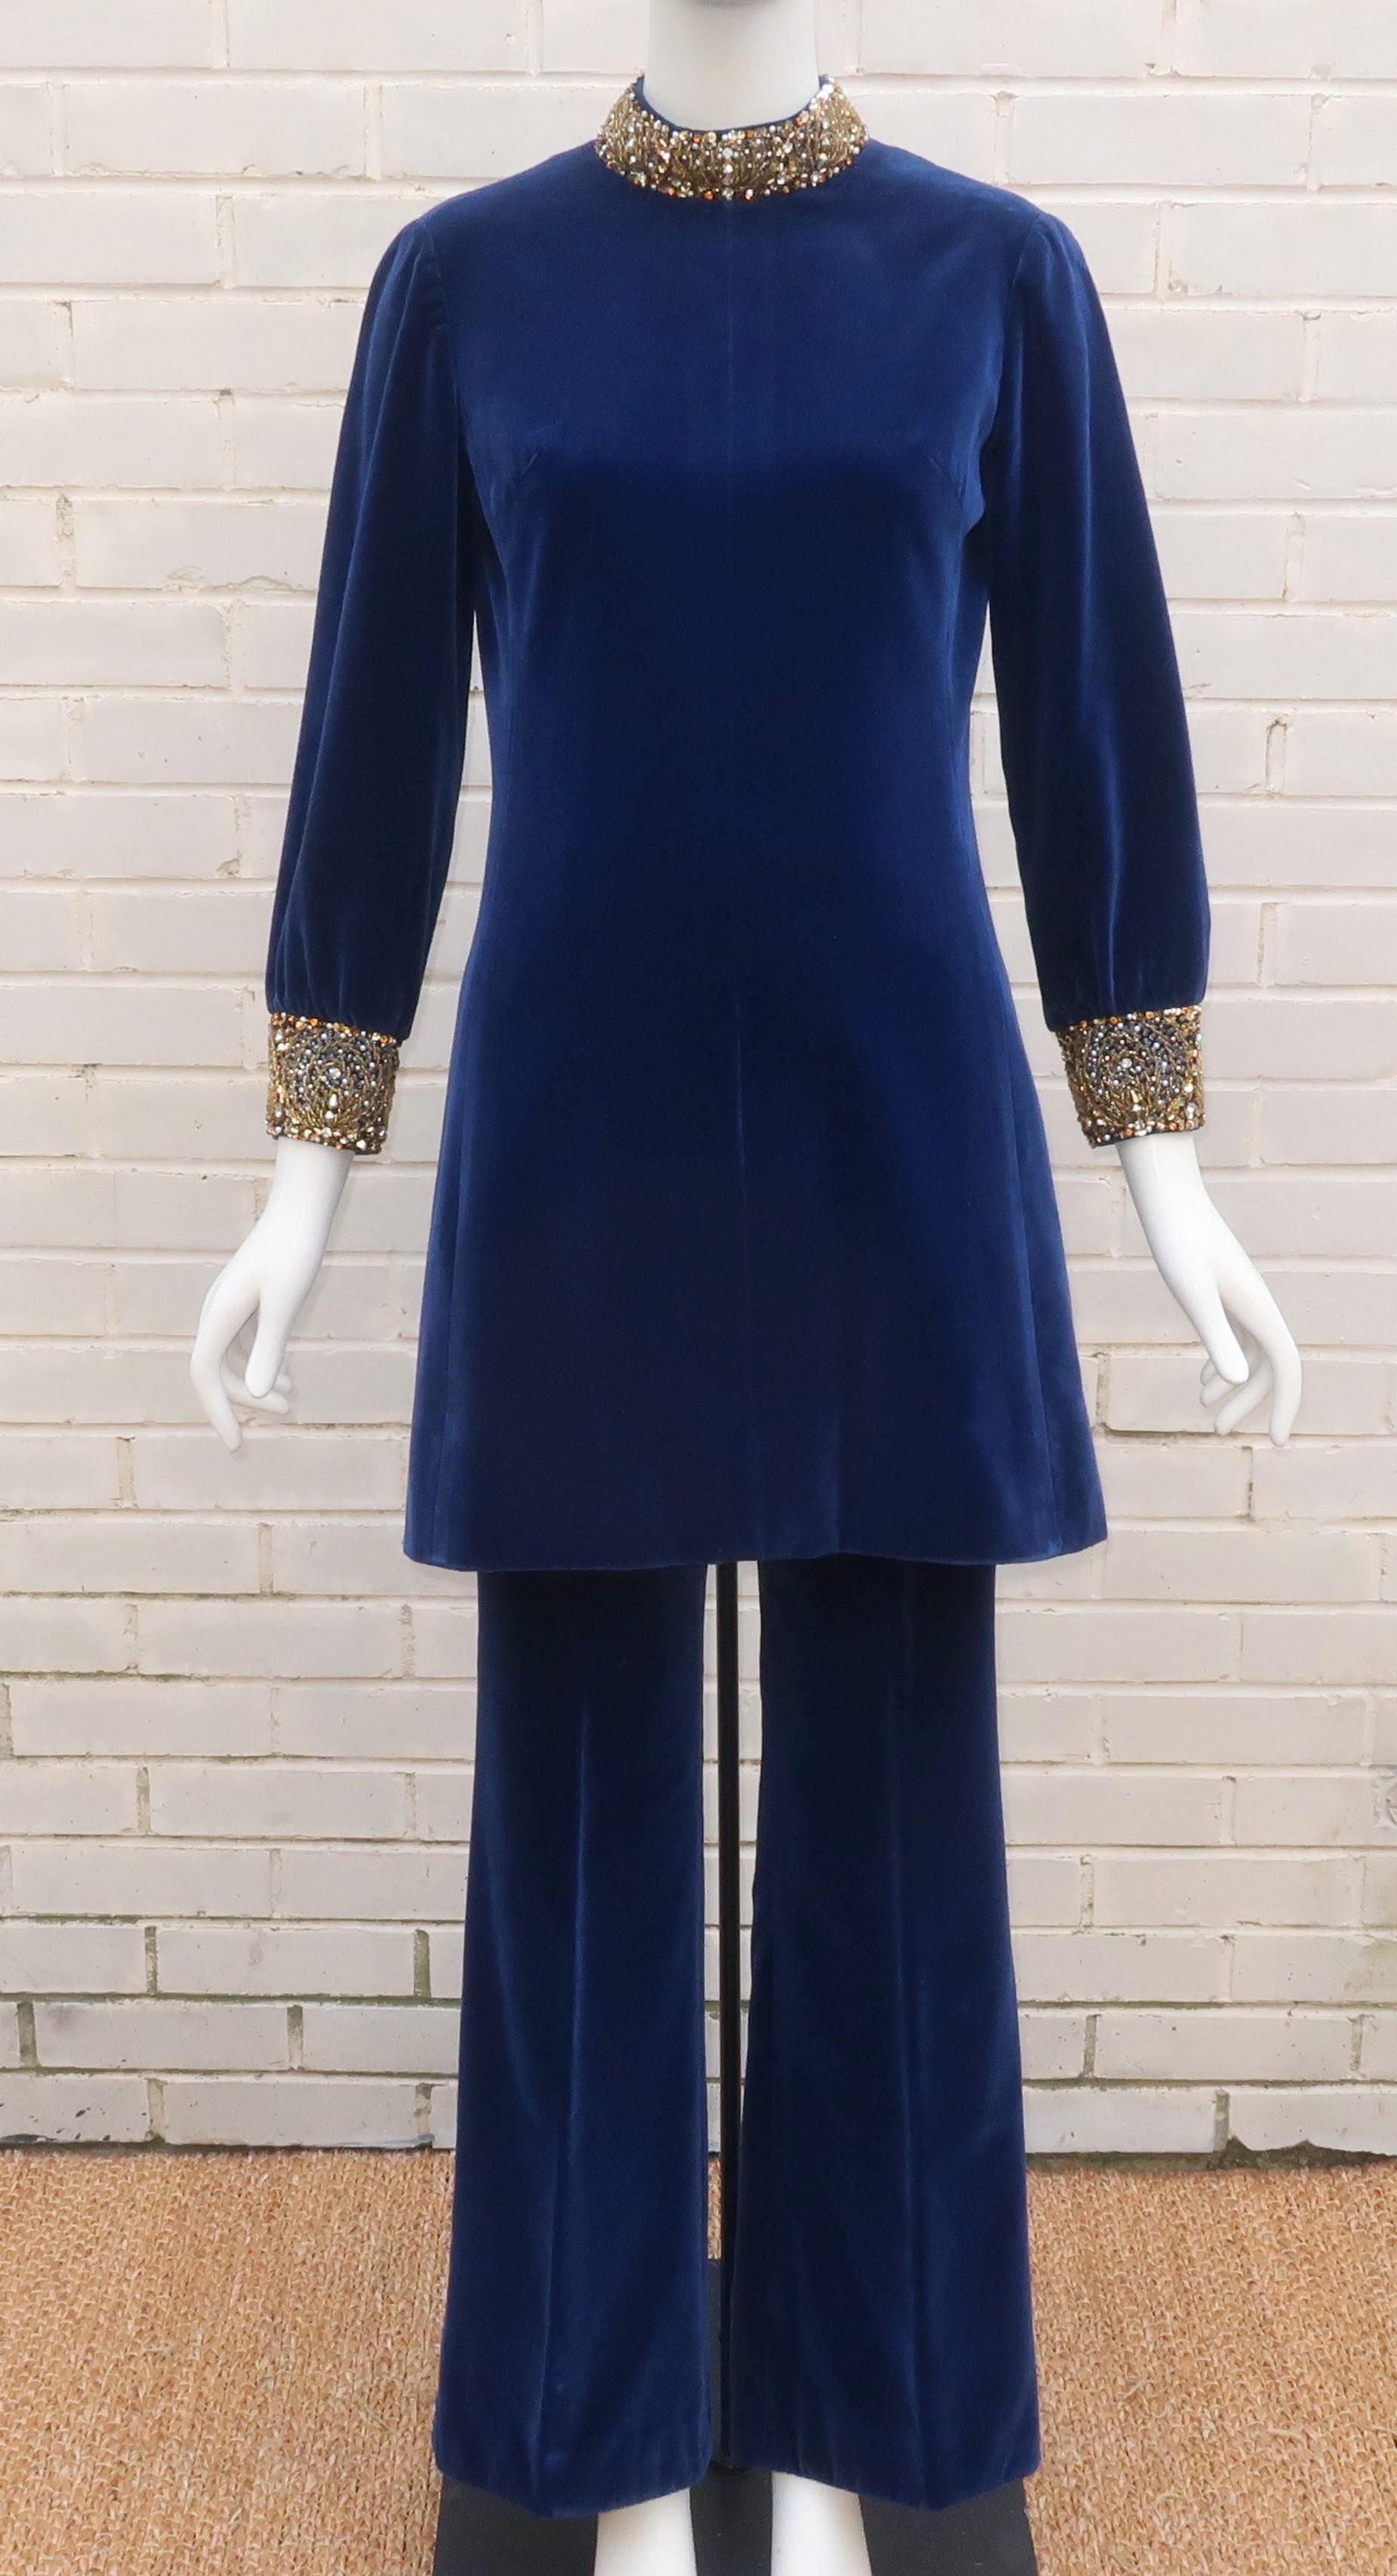 Yeah baby!  Get a swinging 1960's vibe in a Dynasty blue velvet pant suit with heavily beaded collar and button cuffs.  The two piece ensemble consists of a tunic style top that can serve double duty as a mini and pants with a subtle bell cuff. 